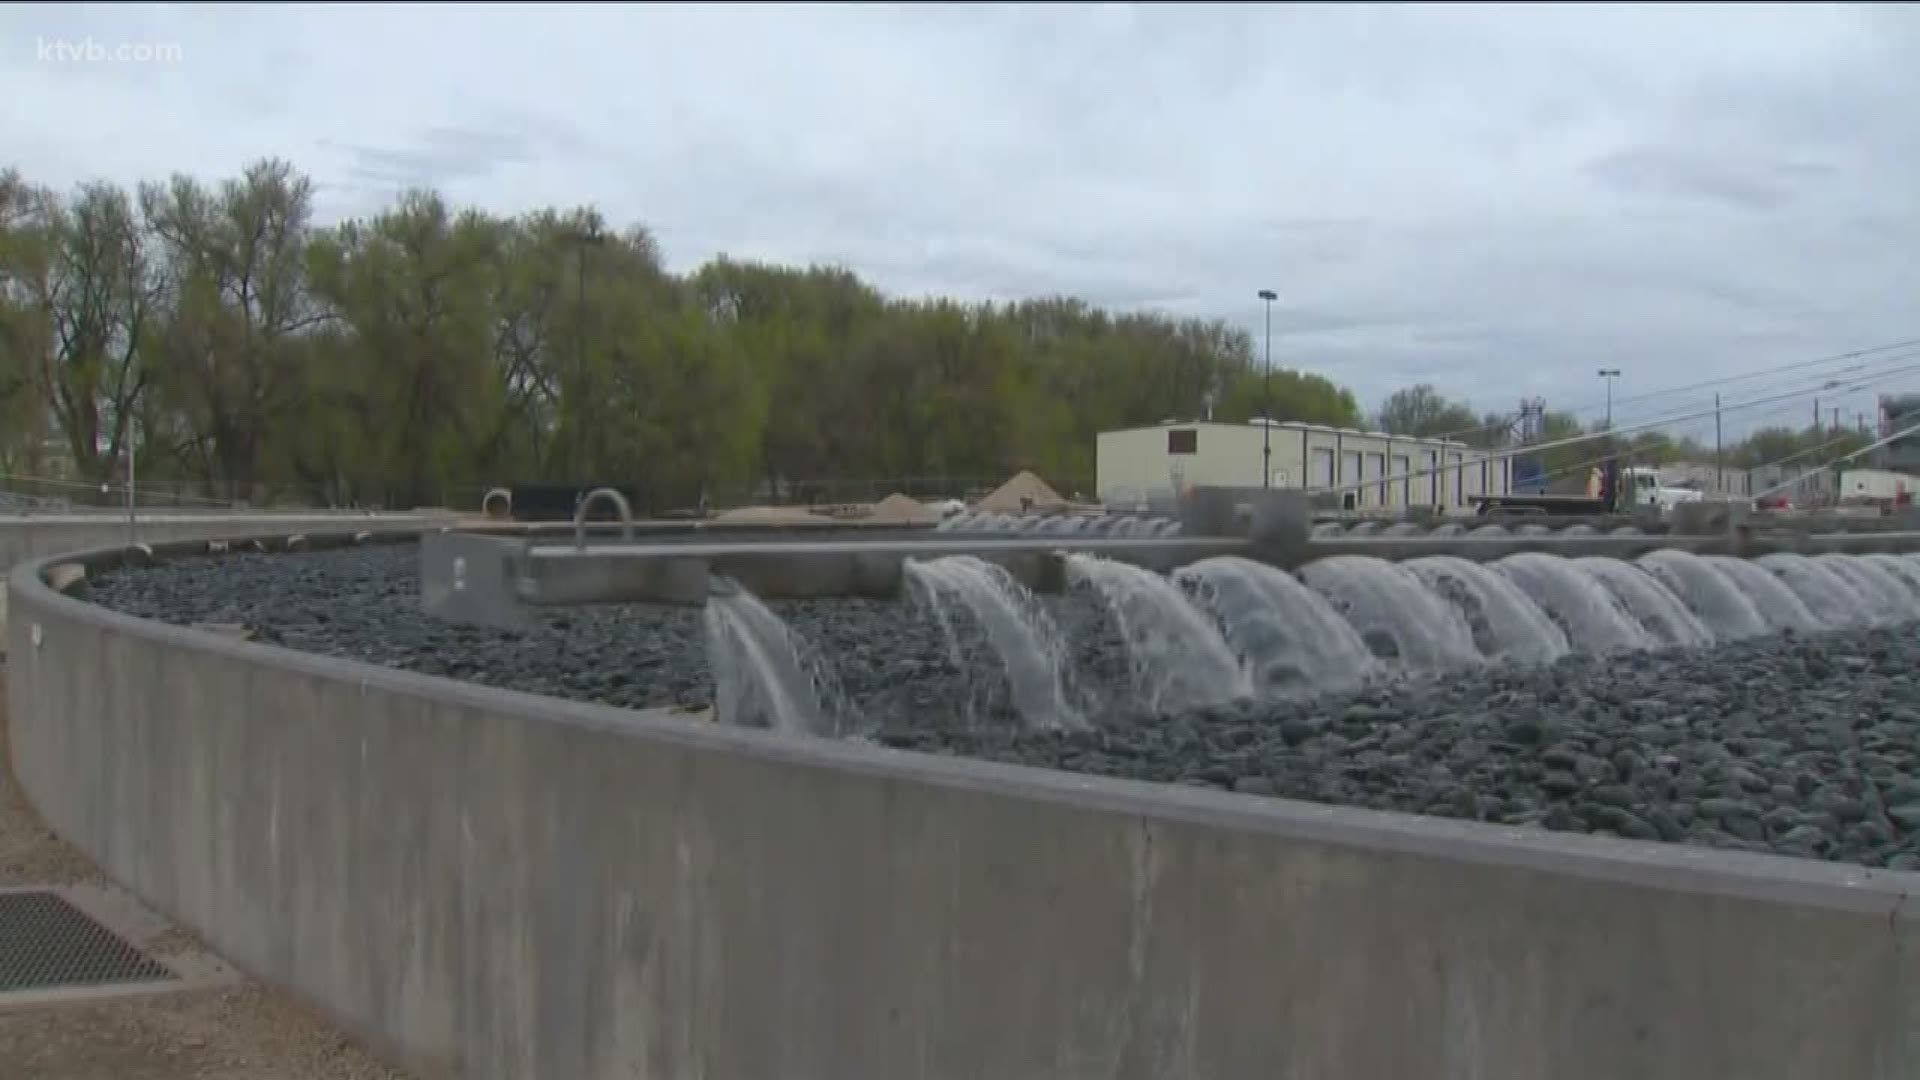 The city's wastewater treatment plant needs an expensive upgrade.